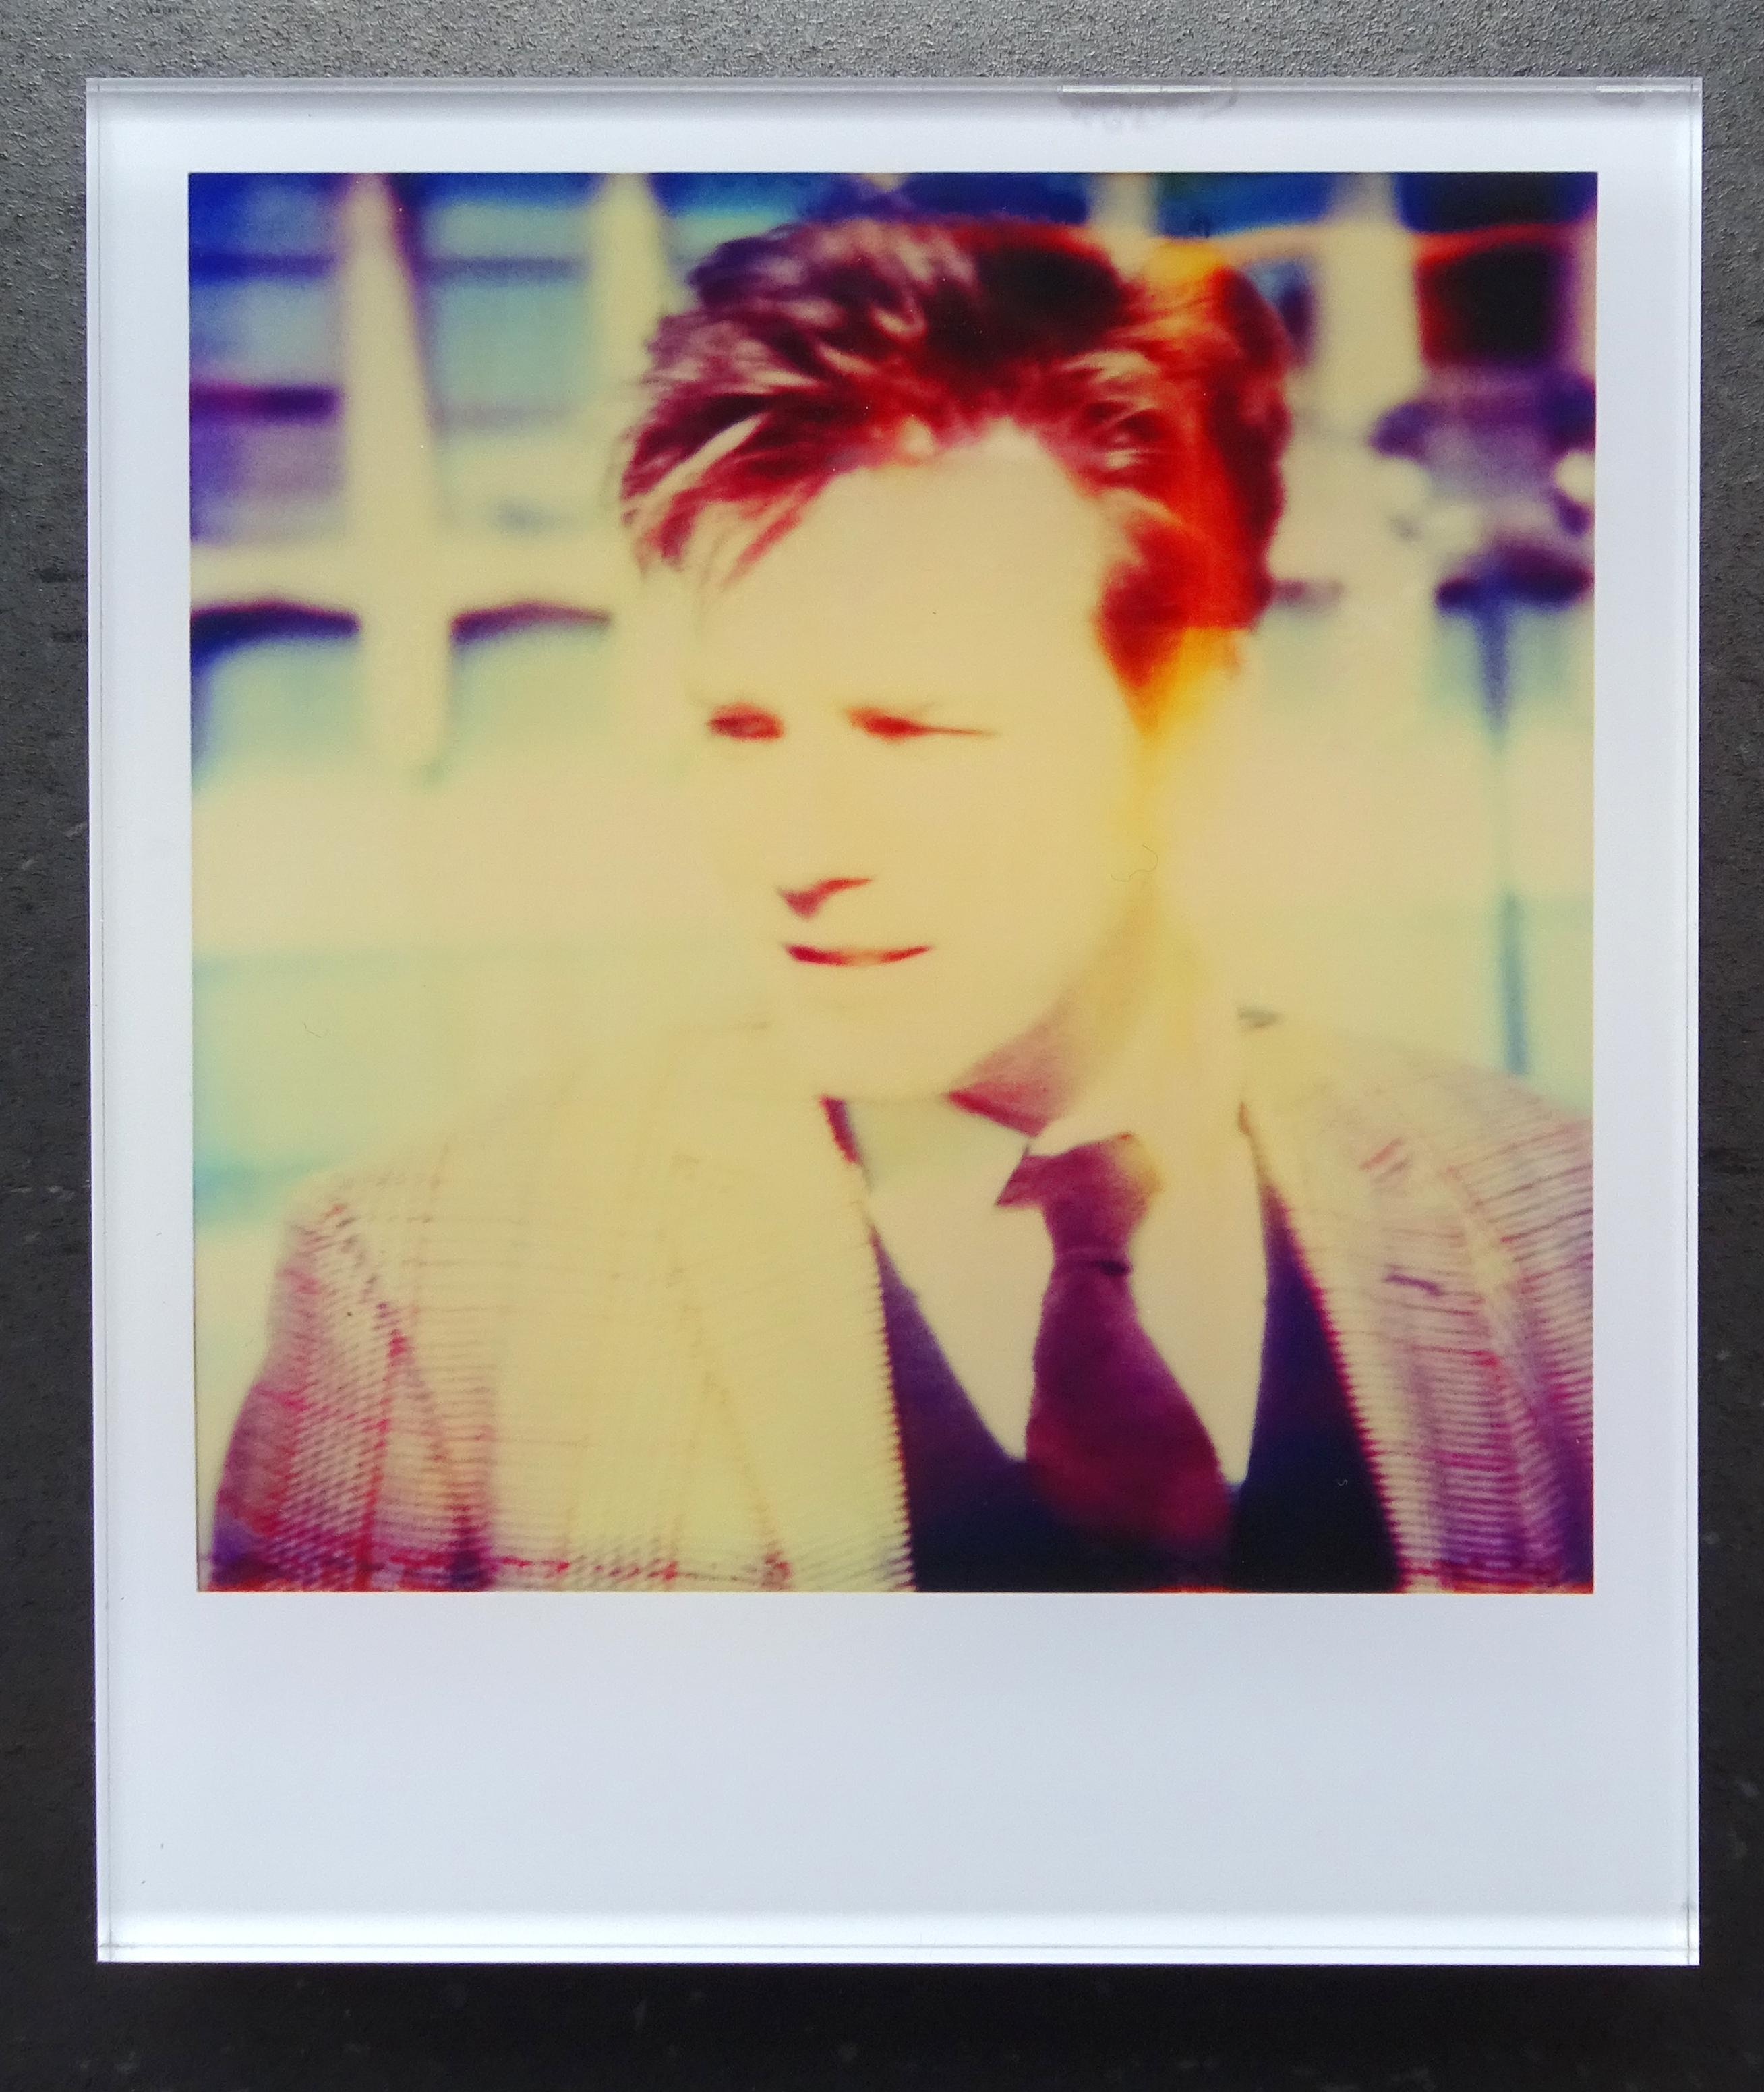 Stefanie Schneider's Minis
Sam (Stay) - 2006
signed and signature brand on verso
Lambda digital Color Photographs based on a Polaroid

from the movie 'Stay' by Marc Forster, featuring Ewan McGregor and Naomi Watts.

Polaroid sized open Editions